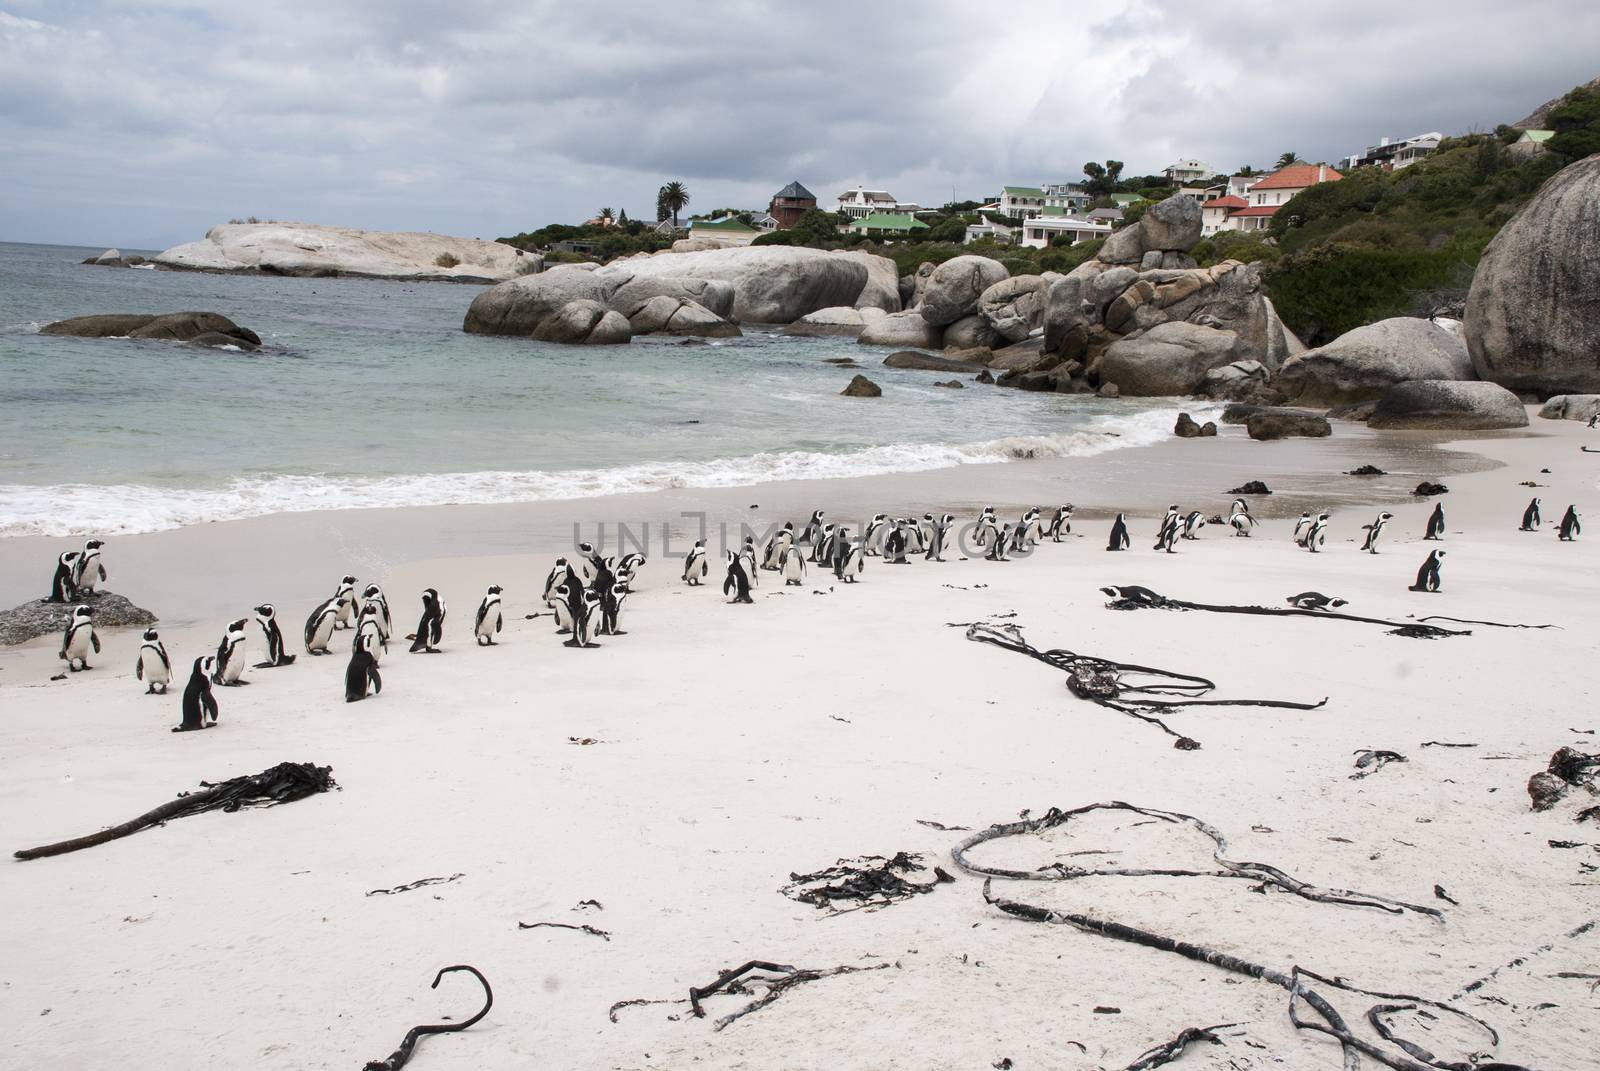 Penguins on a beach in South Africa